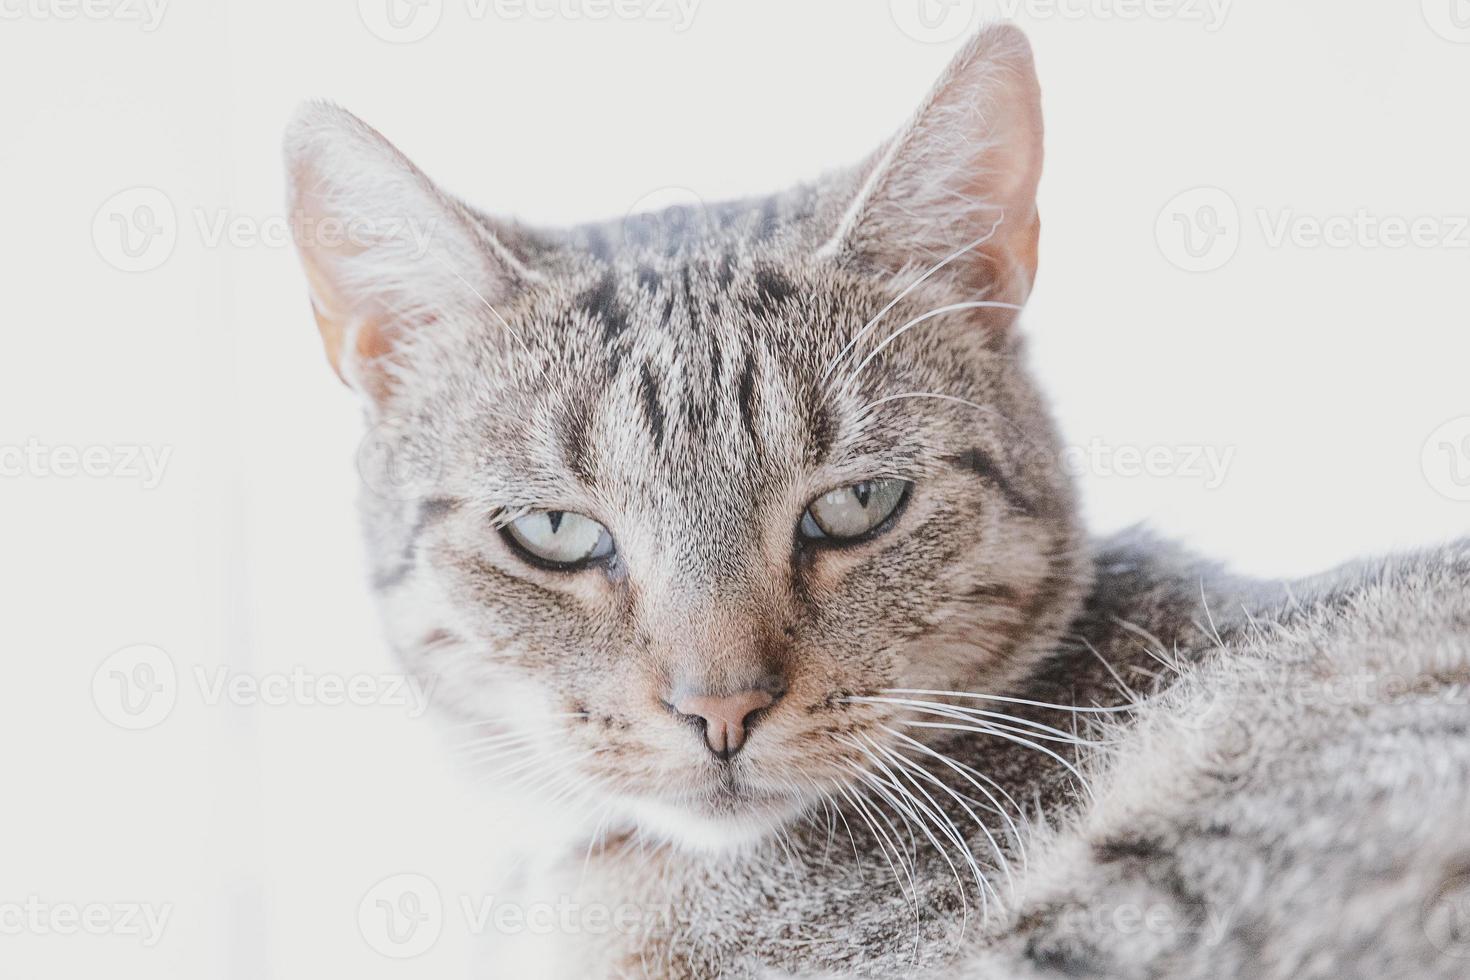 tired gray tabby cat in close-up photo